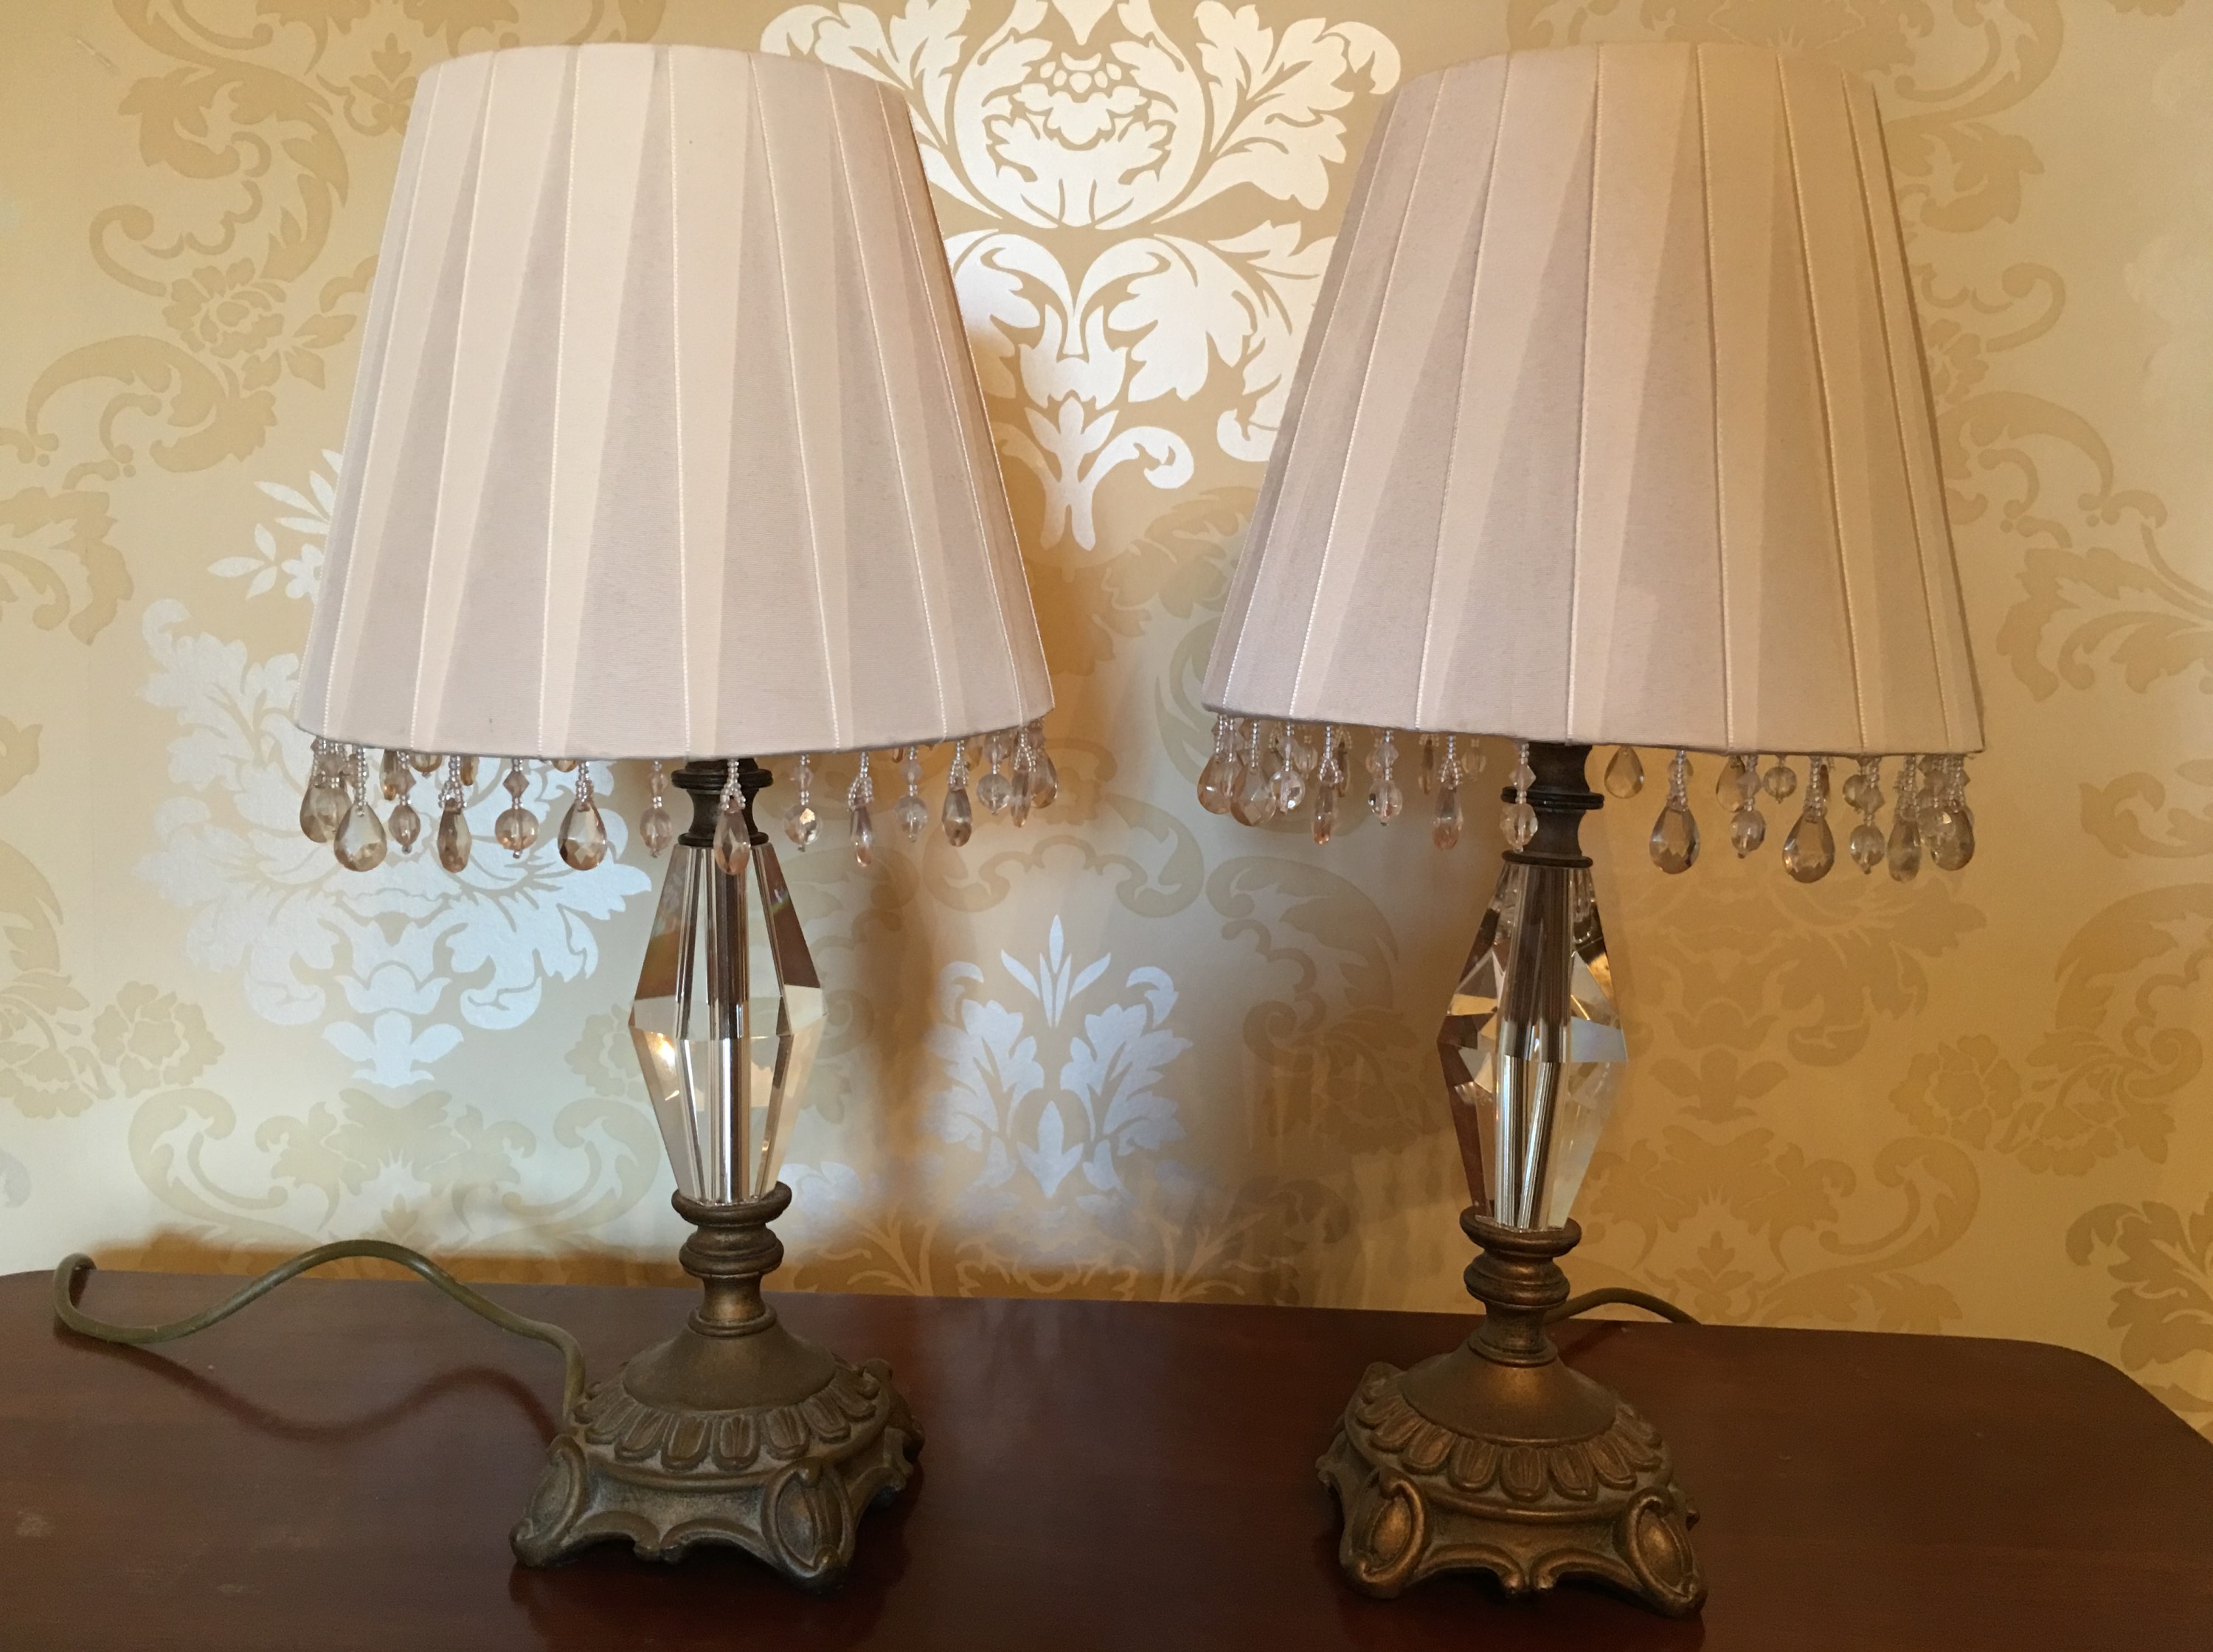 A pair of gilt-mounted cut-glass table lamps